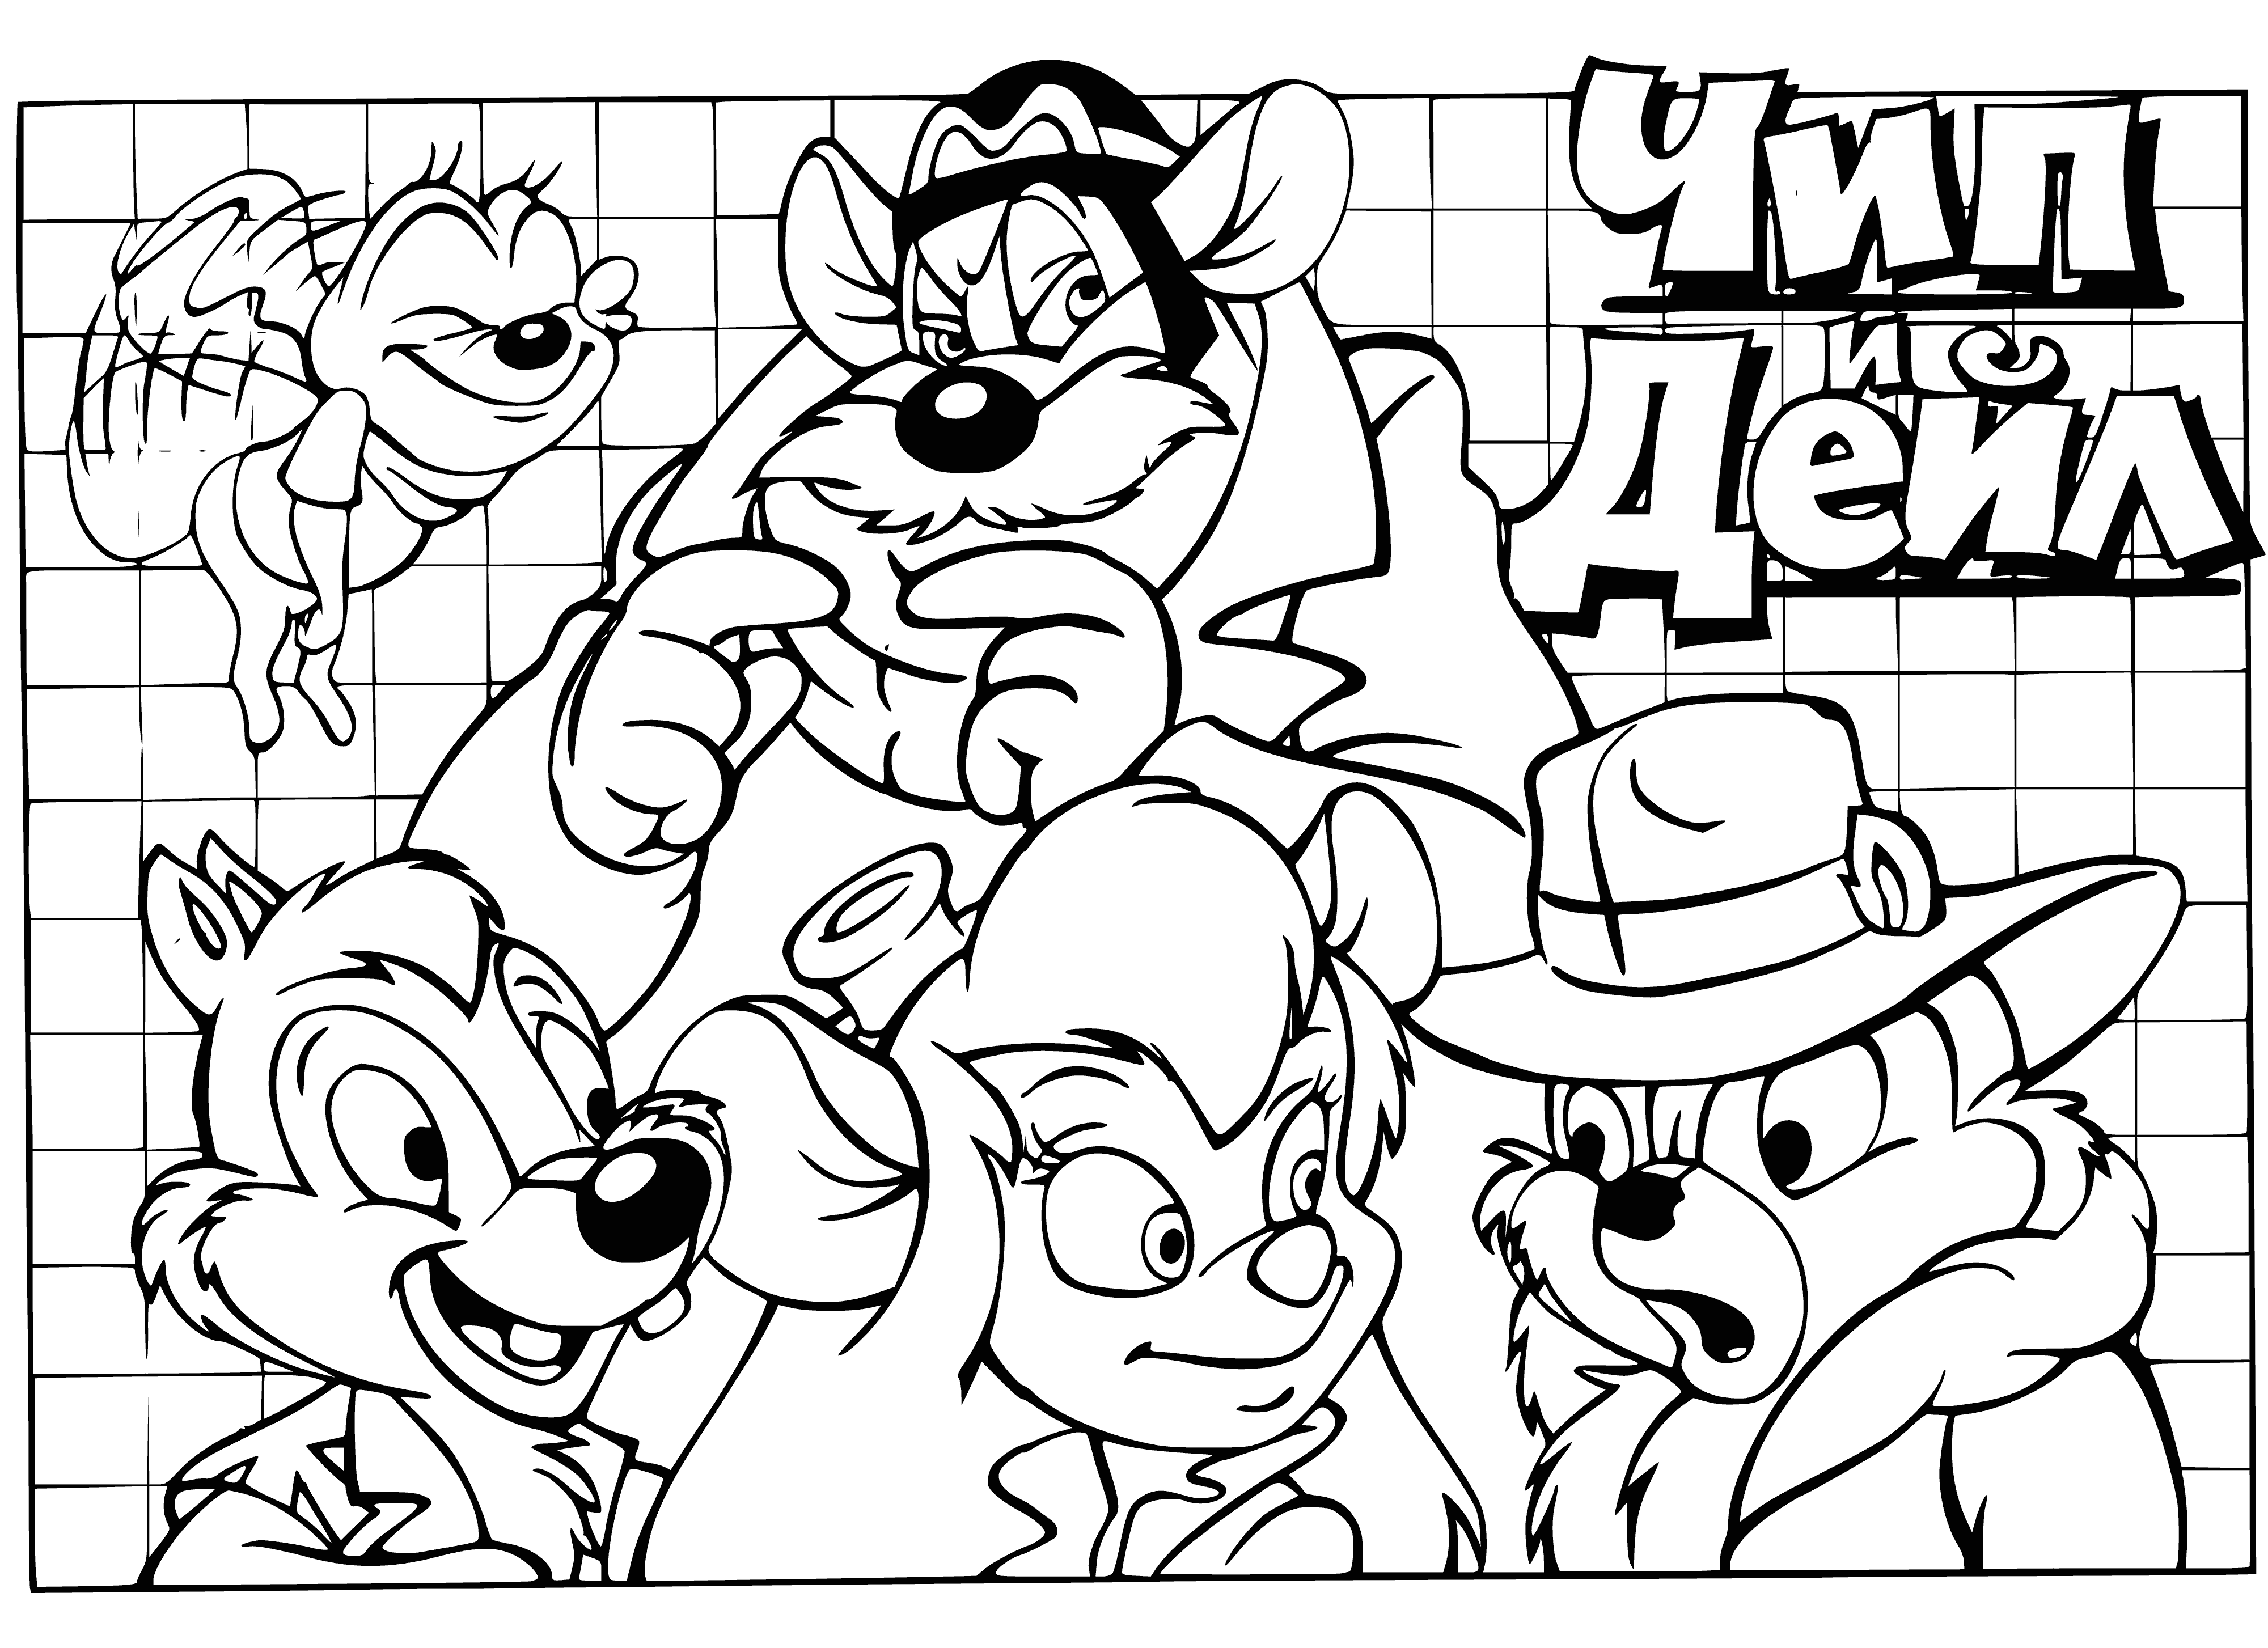 coloring page: Chip, Dale, and two mice join forces to solve mysteries and take down villains using their resourcefulness and courage. #ChipAndDaleRescueRangers